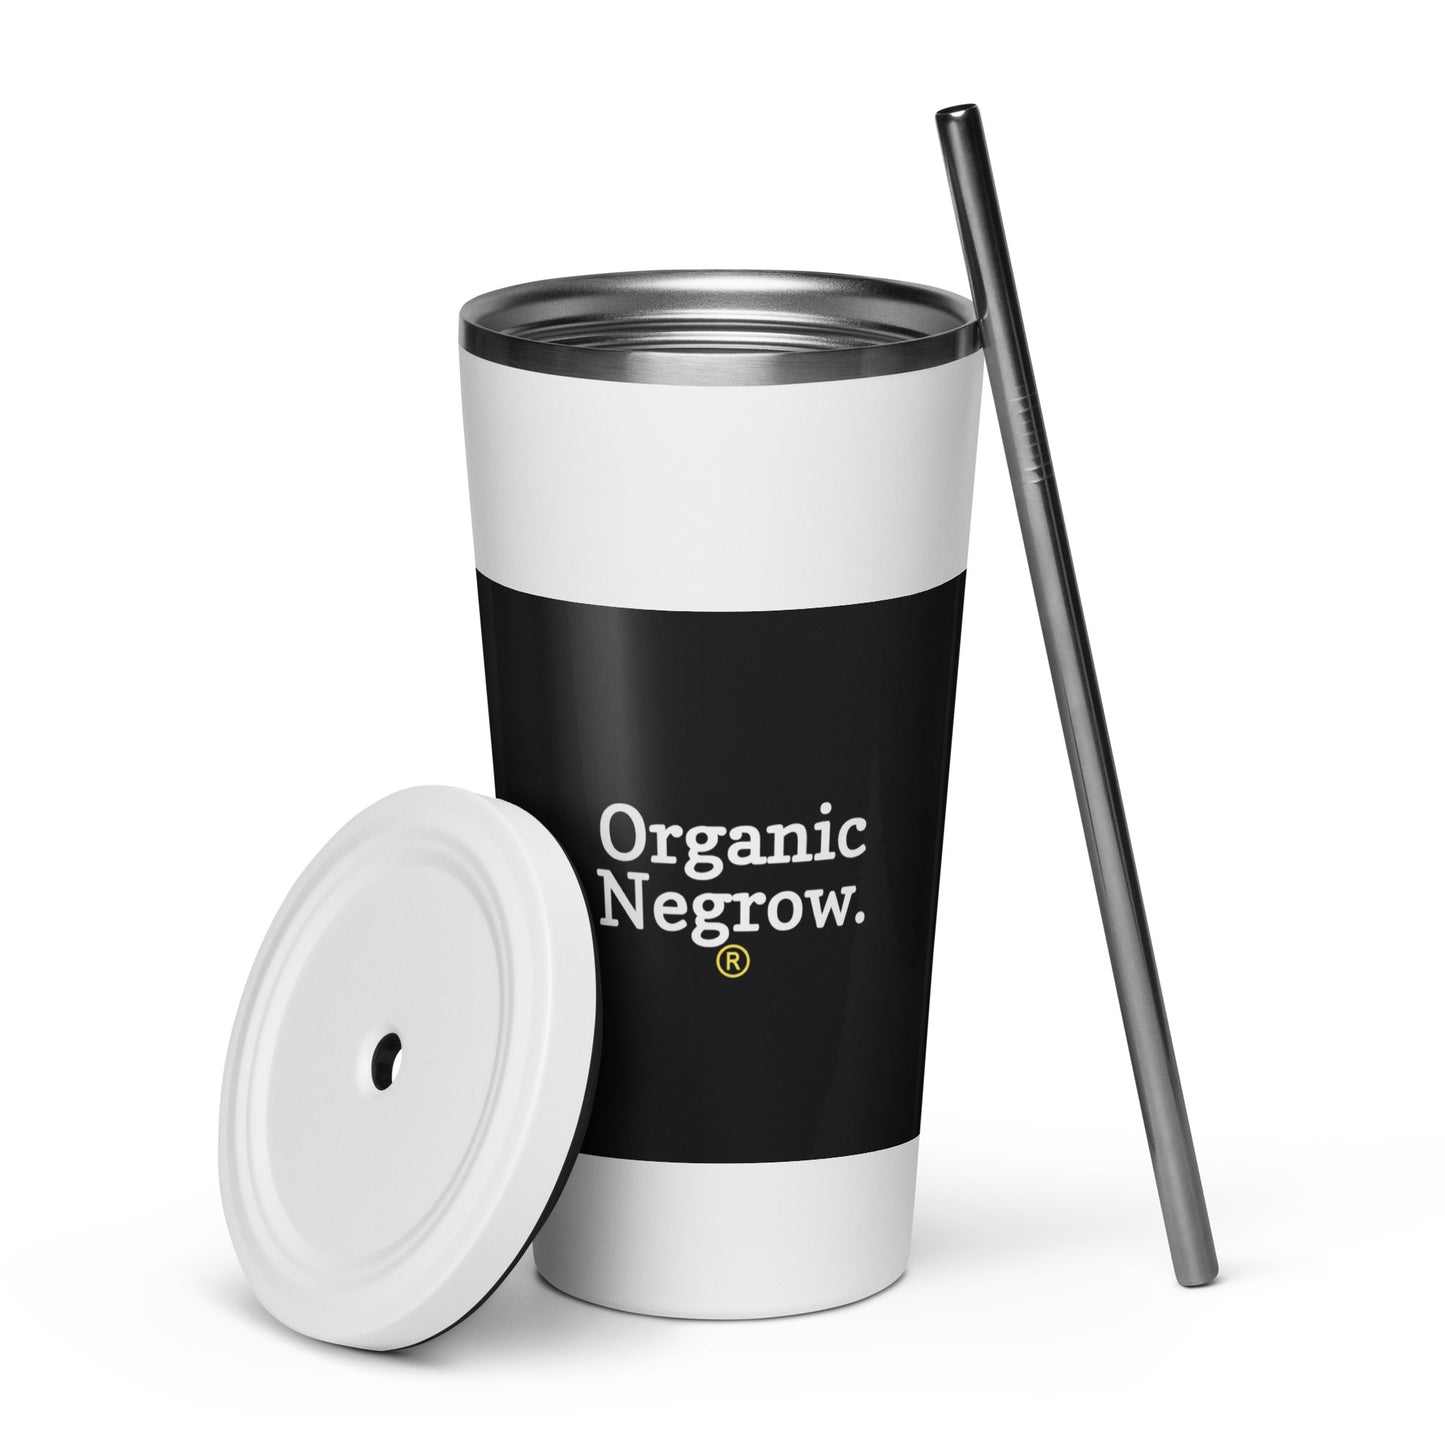 Organic Negrow Tumbler / Insulated tumbler with a straw